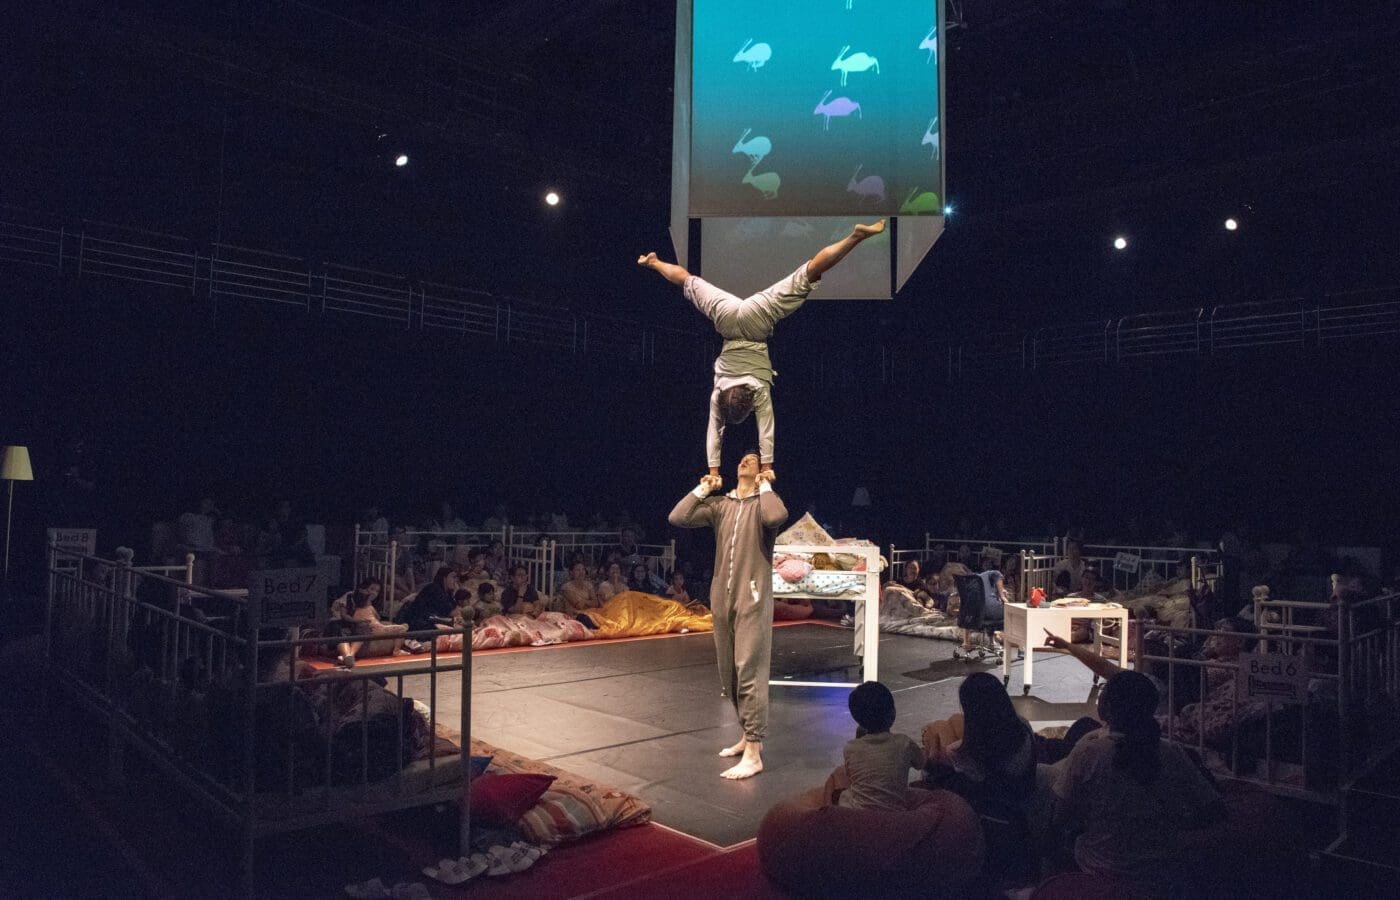 An acrobat lifts another performers into the air upside down. An audience of children watches.